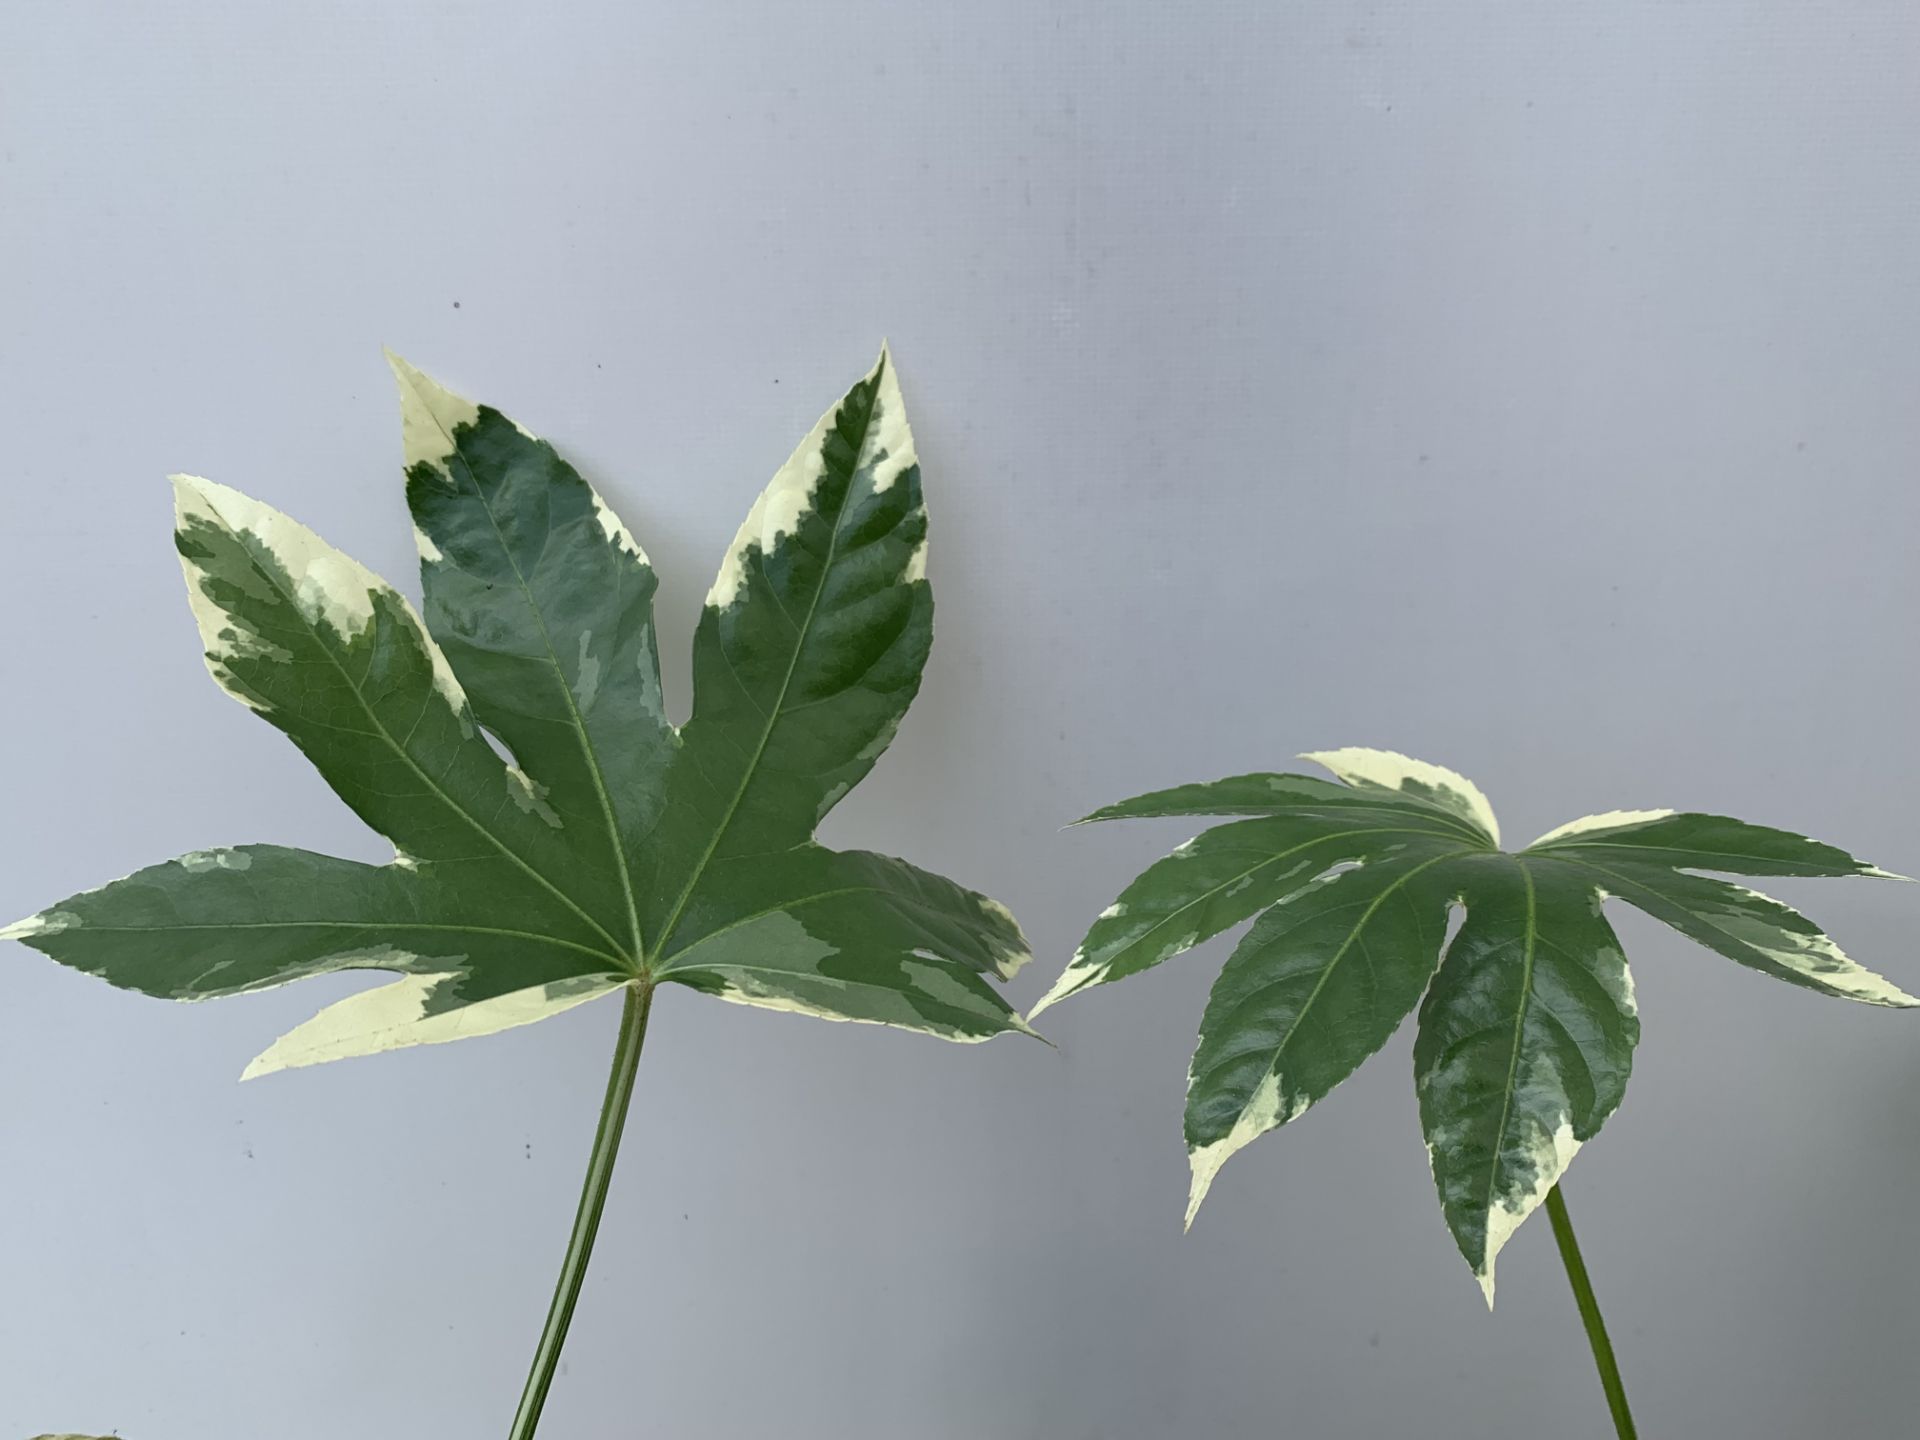 TWO FATSIA JUNGLE GARDEN JAPONICA VARIEGATA IN 2 LTR POTS 50CM TALL PLUS VAT TO BE SOLD FOR THE TWO - Image 9 of 10